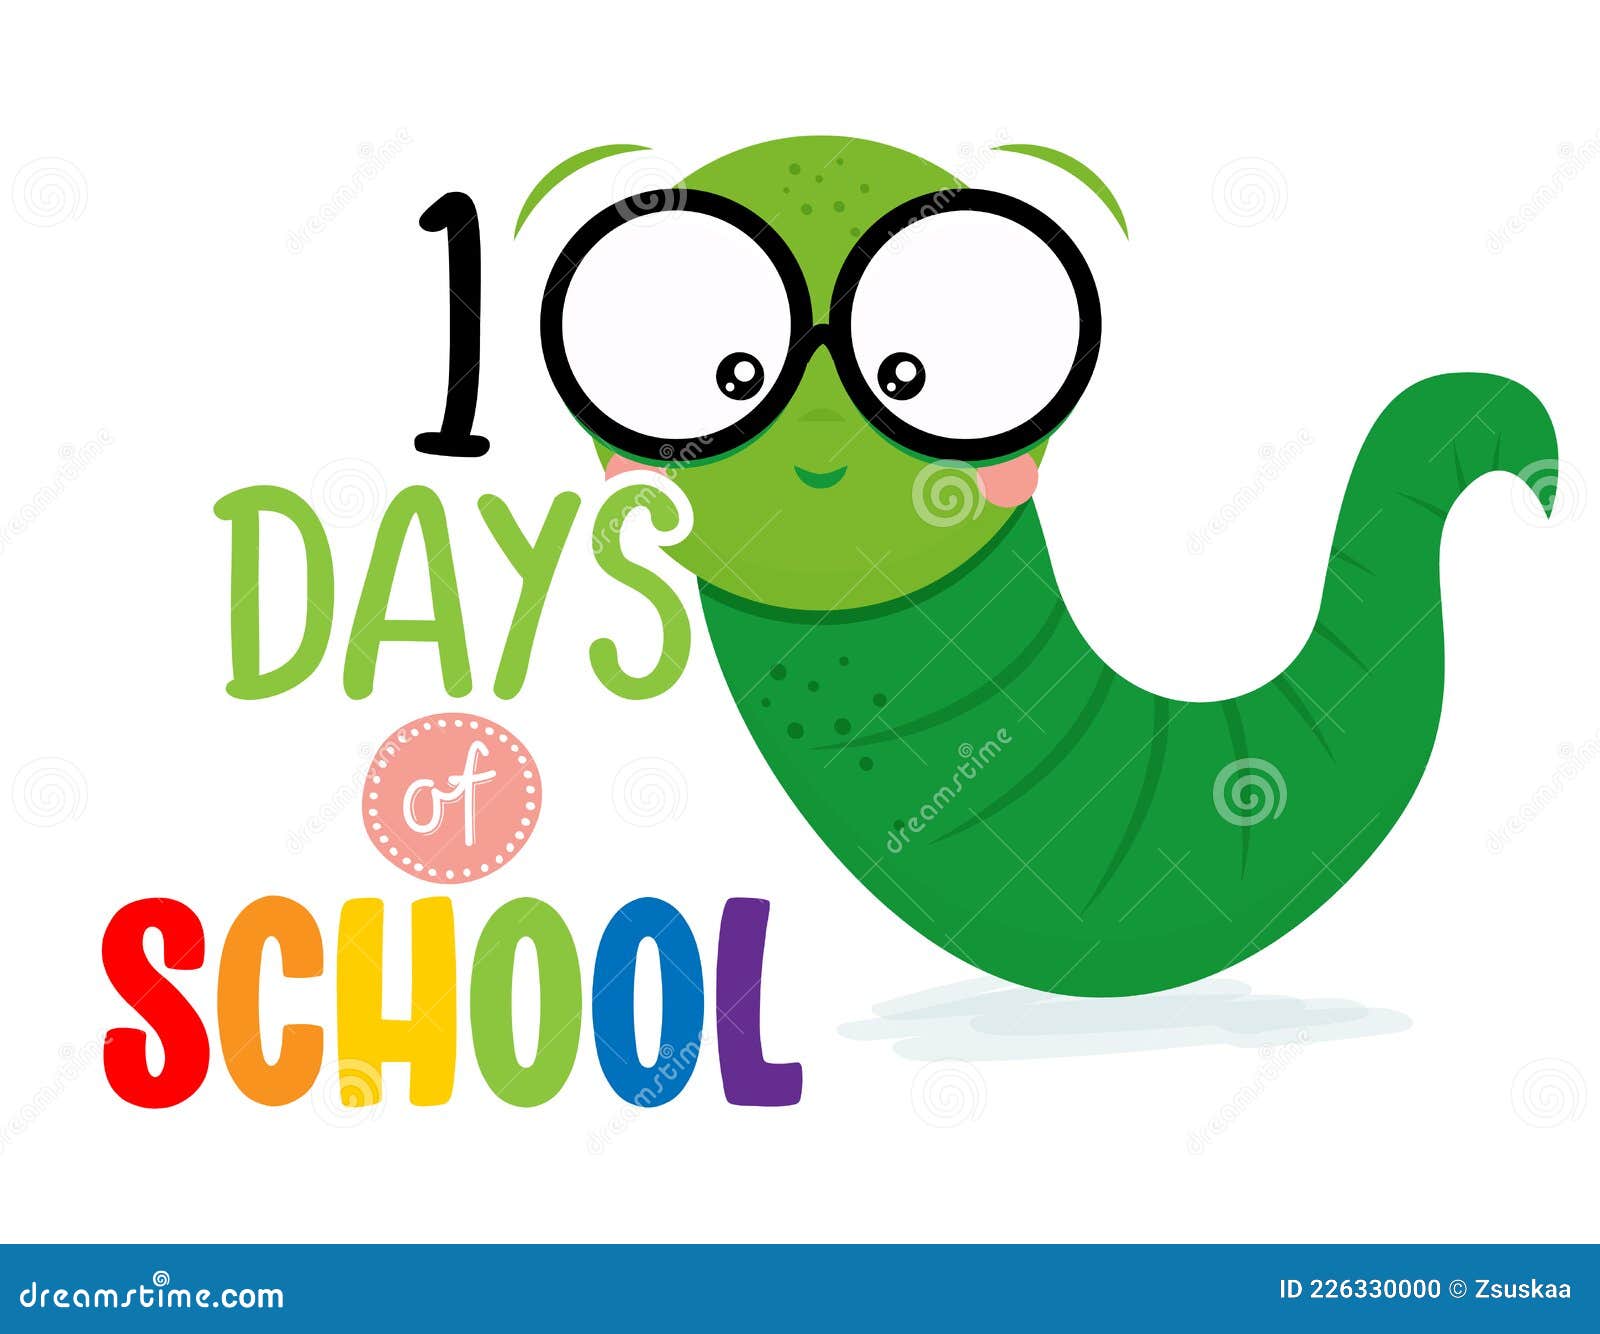 100 days of school - smart worm, students, with quote. cute catterpillar character.